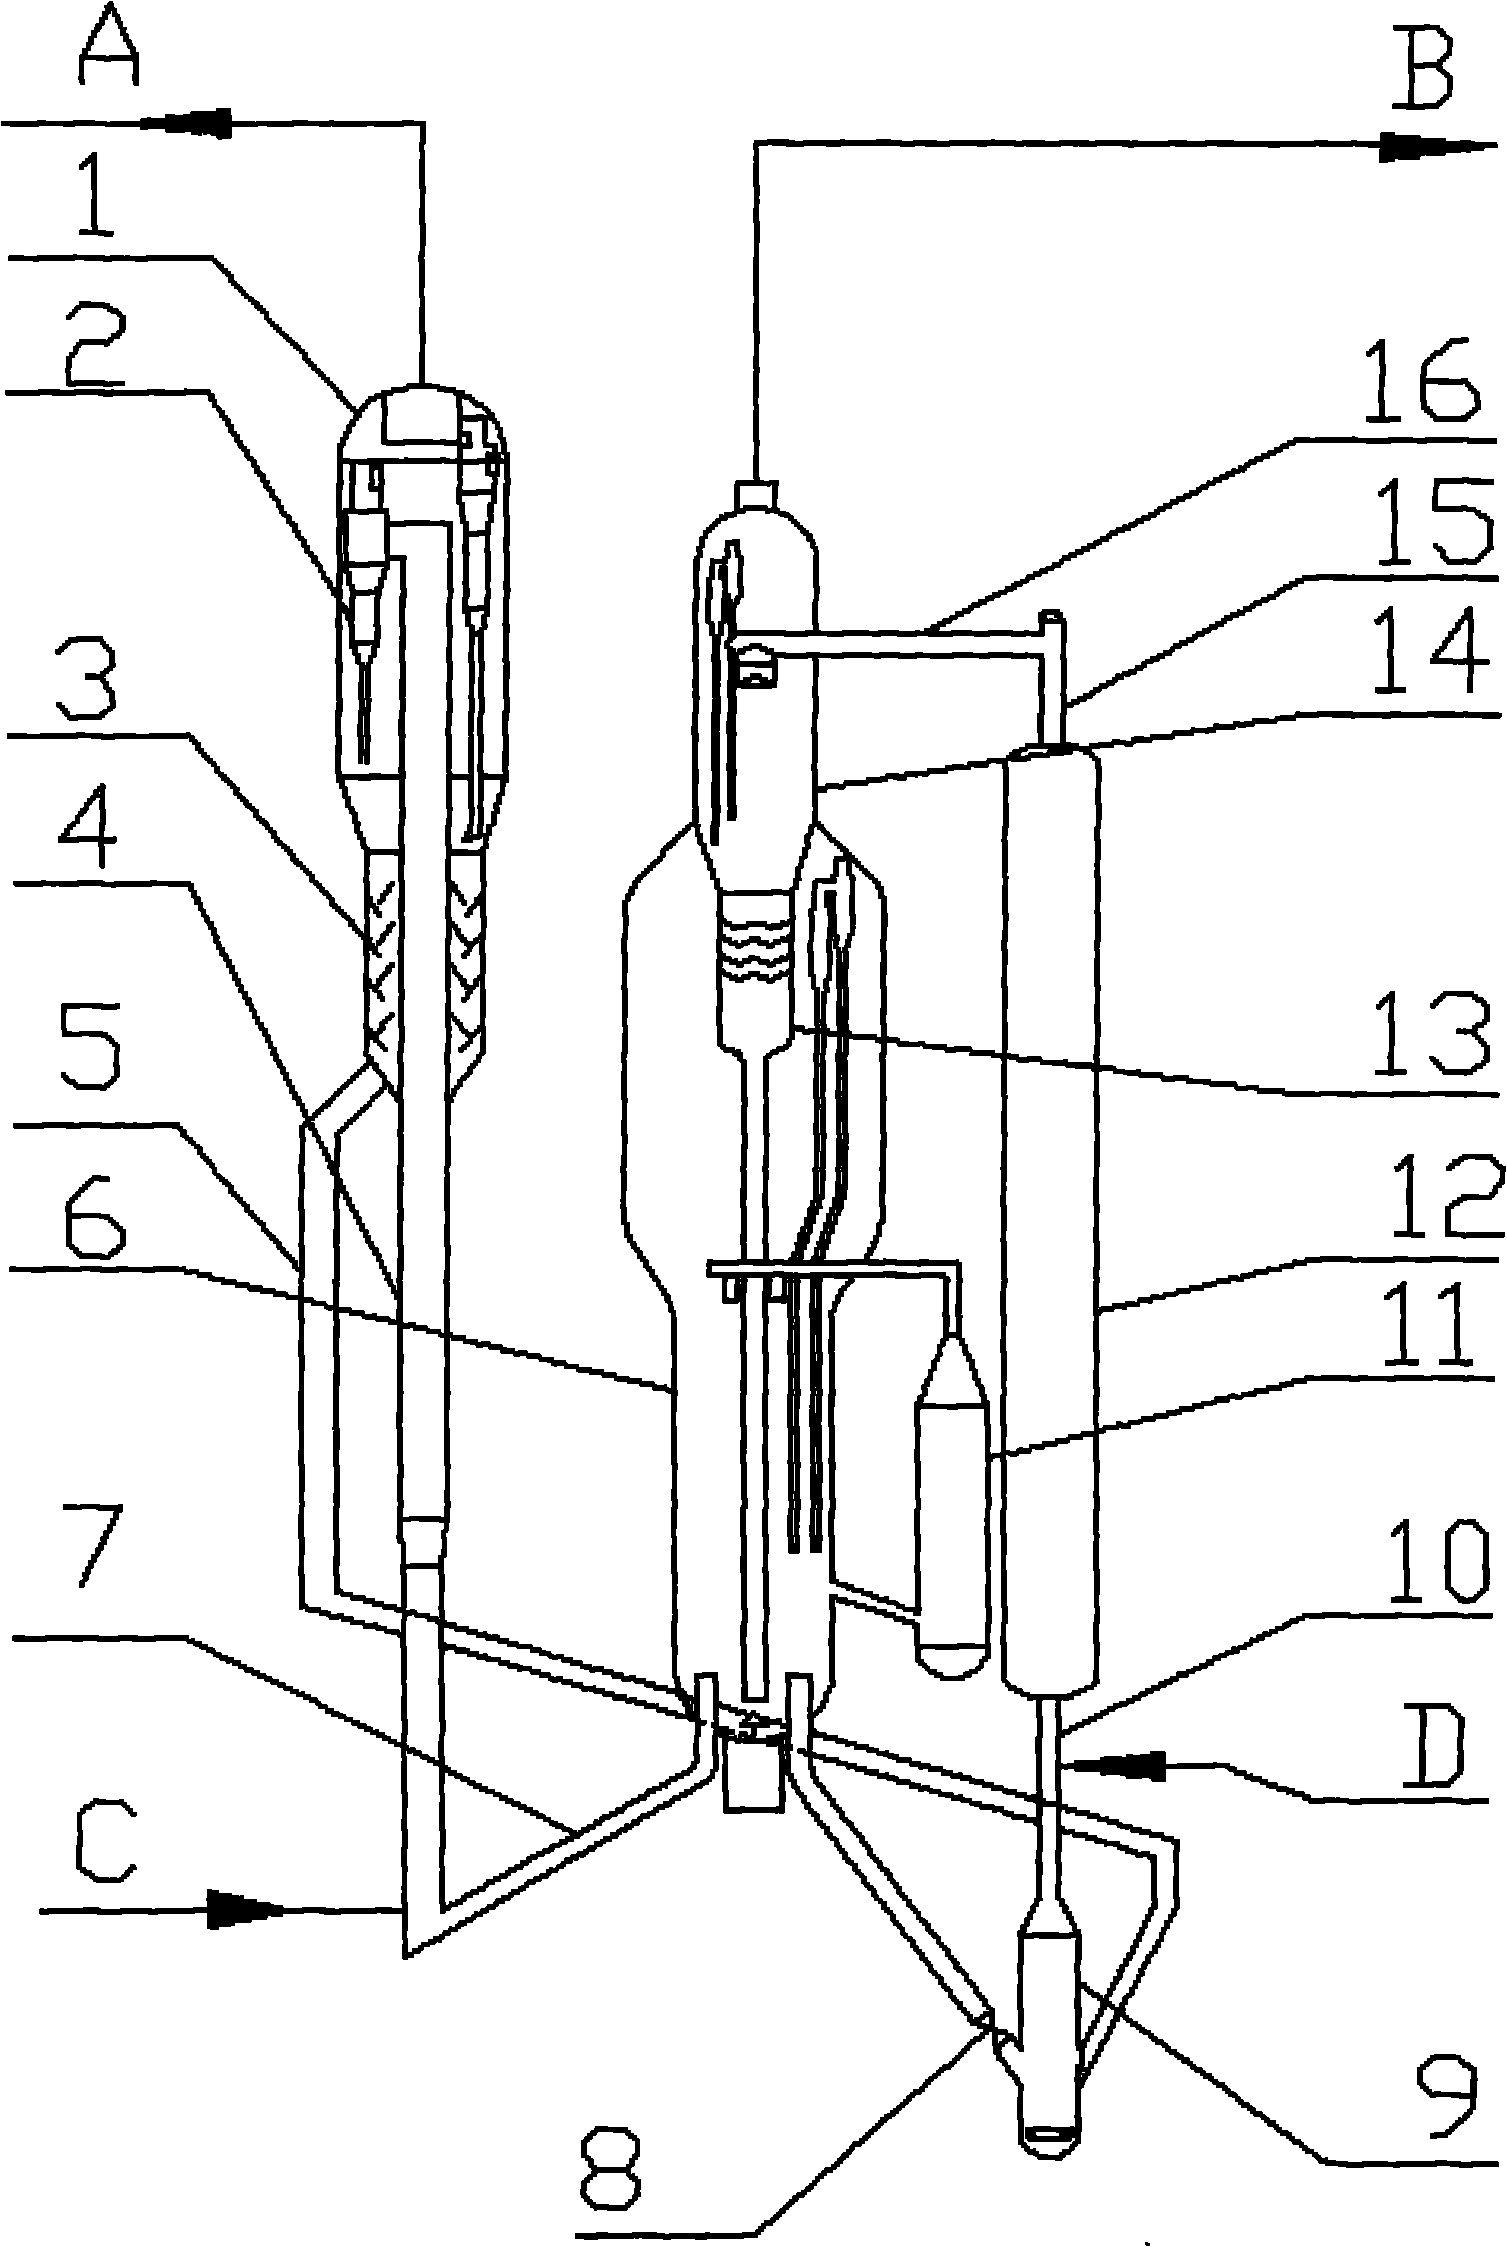 Method and device for modifying low-quality heavy oil